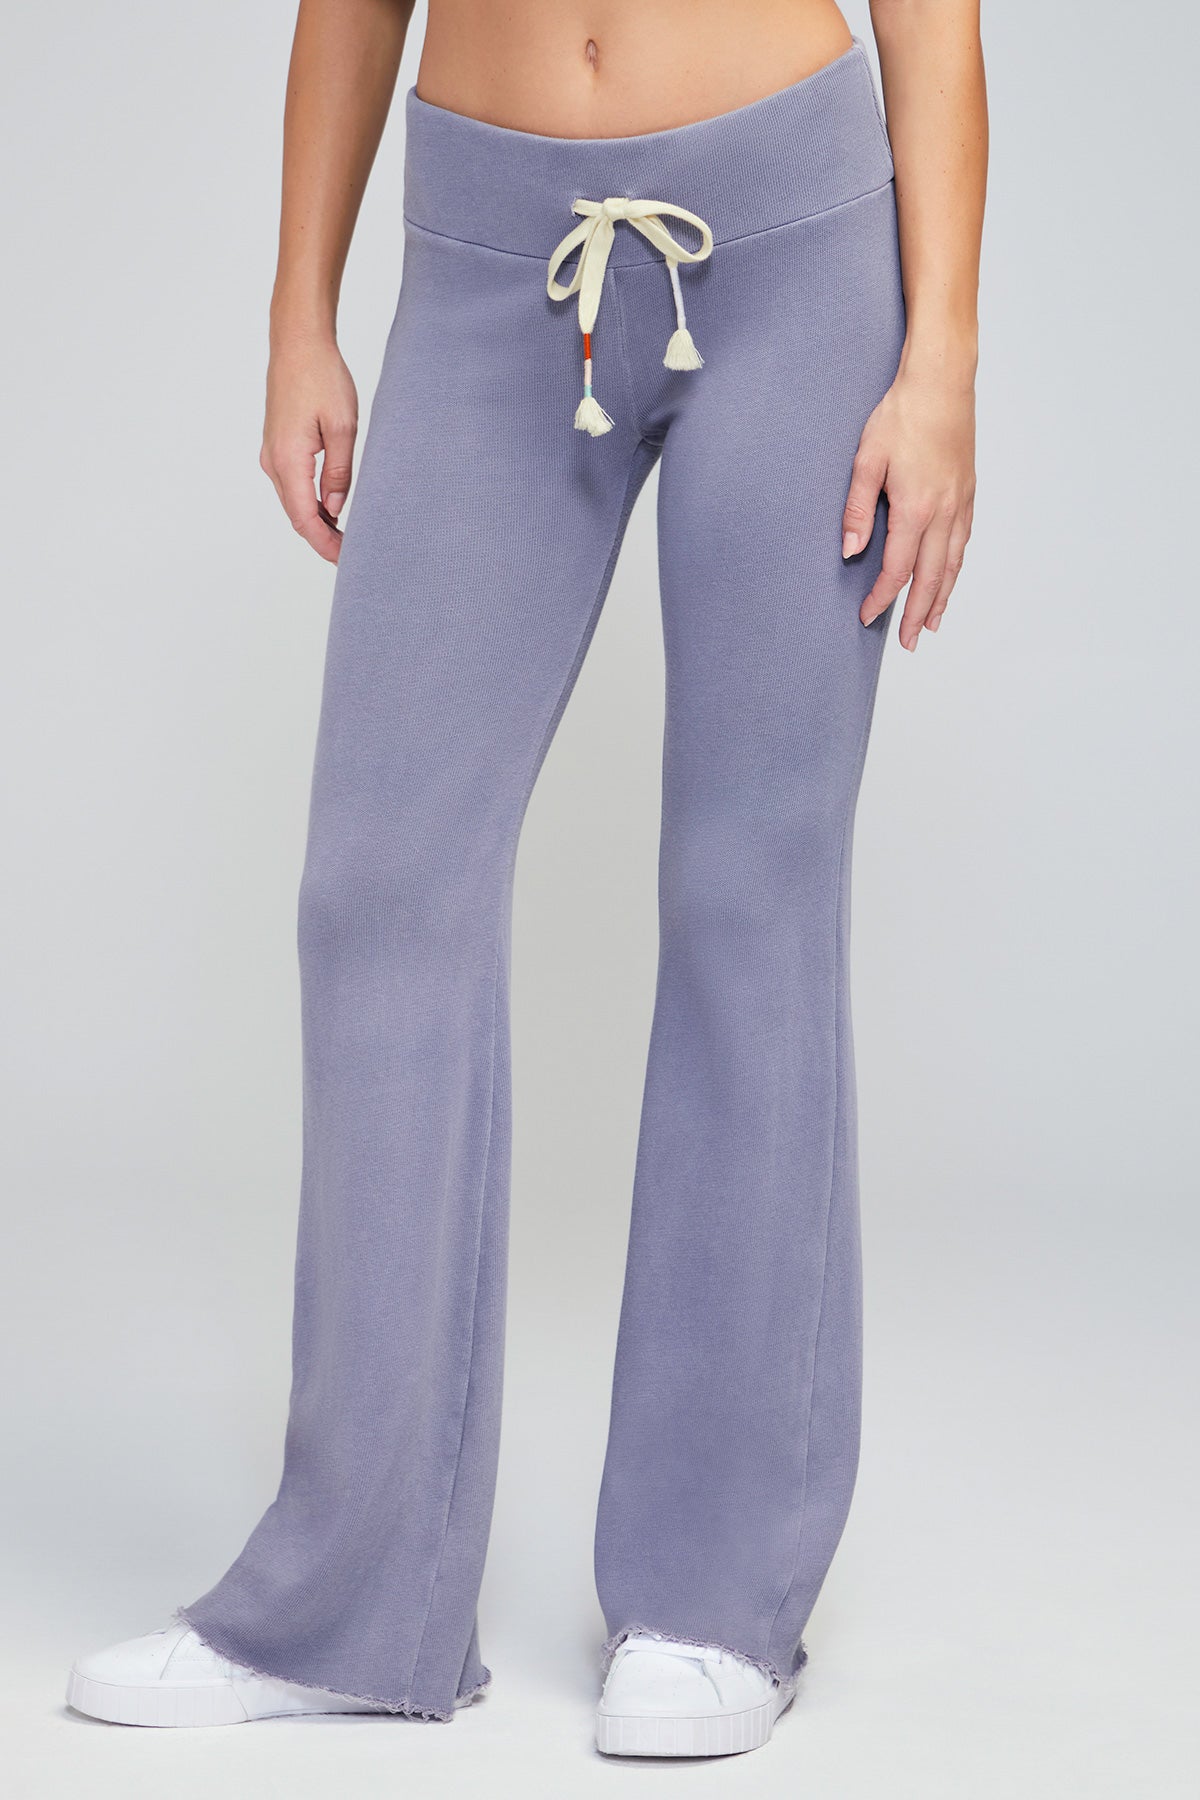 Wildfox Couture Women's Tennis Club Lounge Pant - ShopStyle Casual Trousers